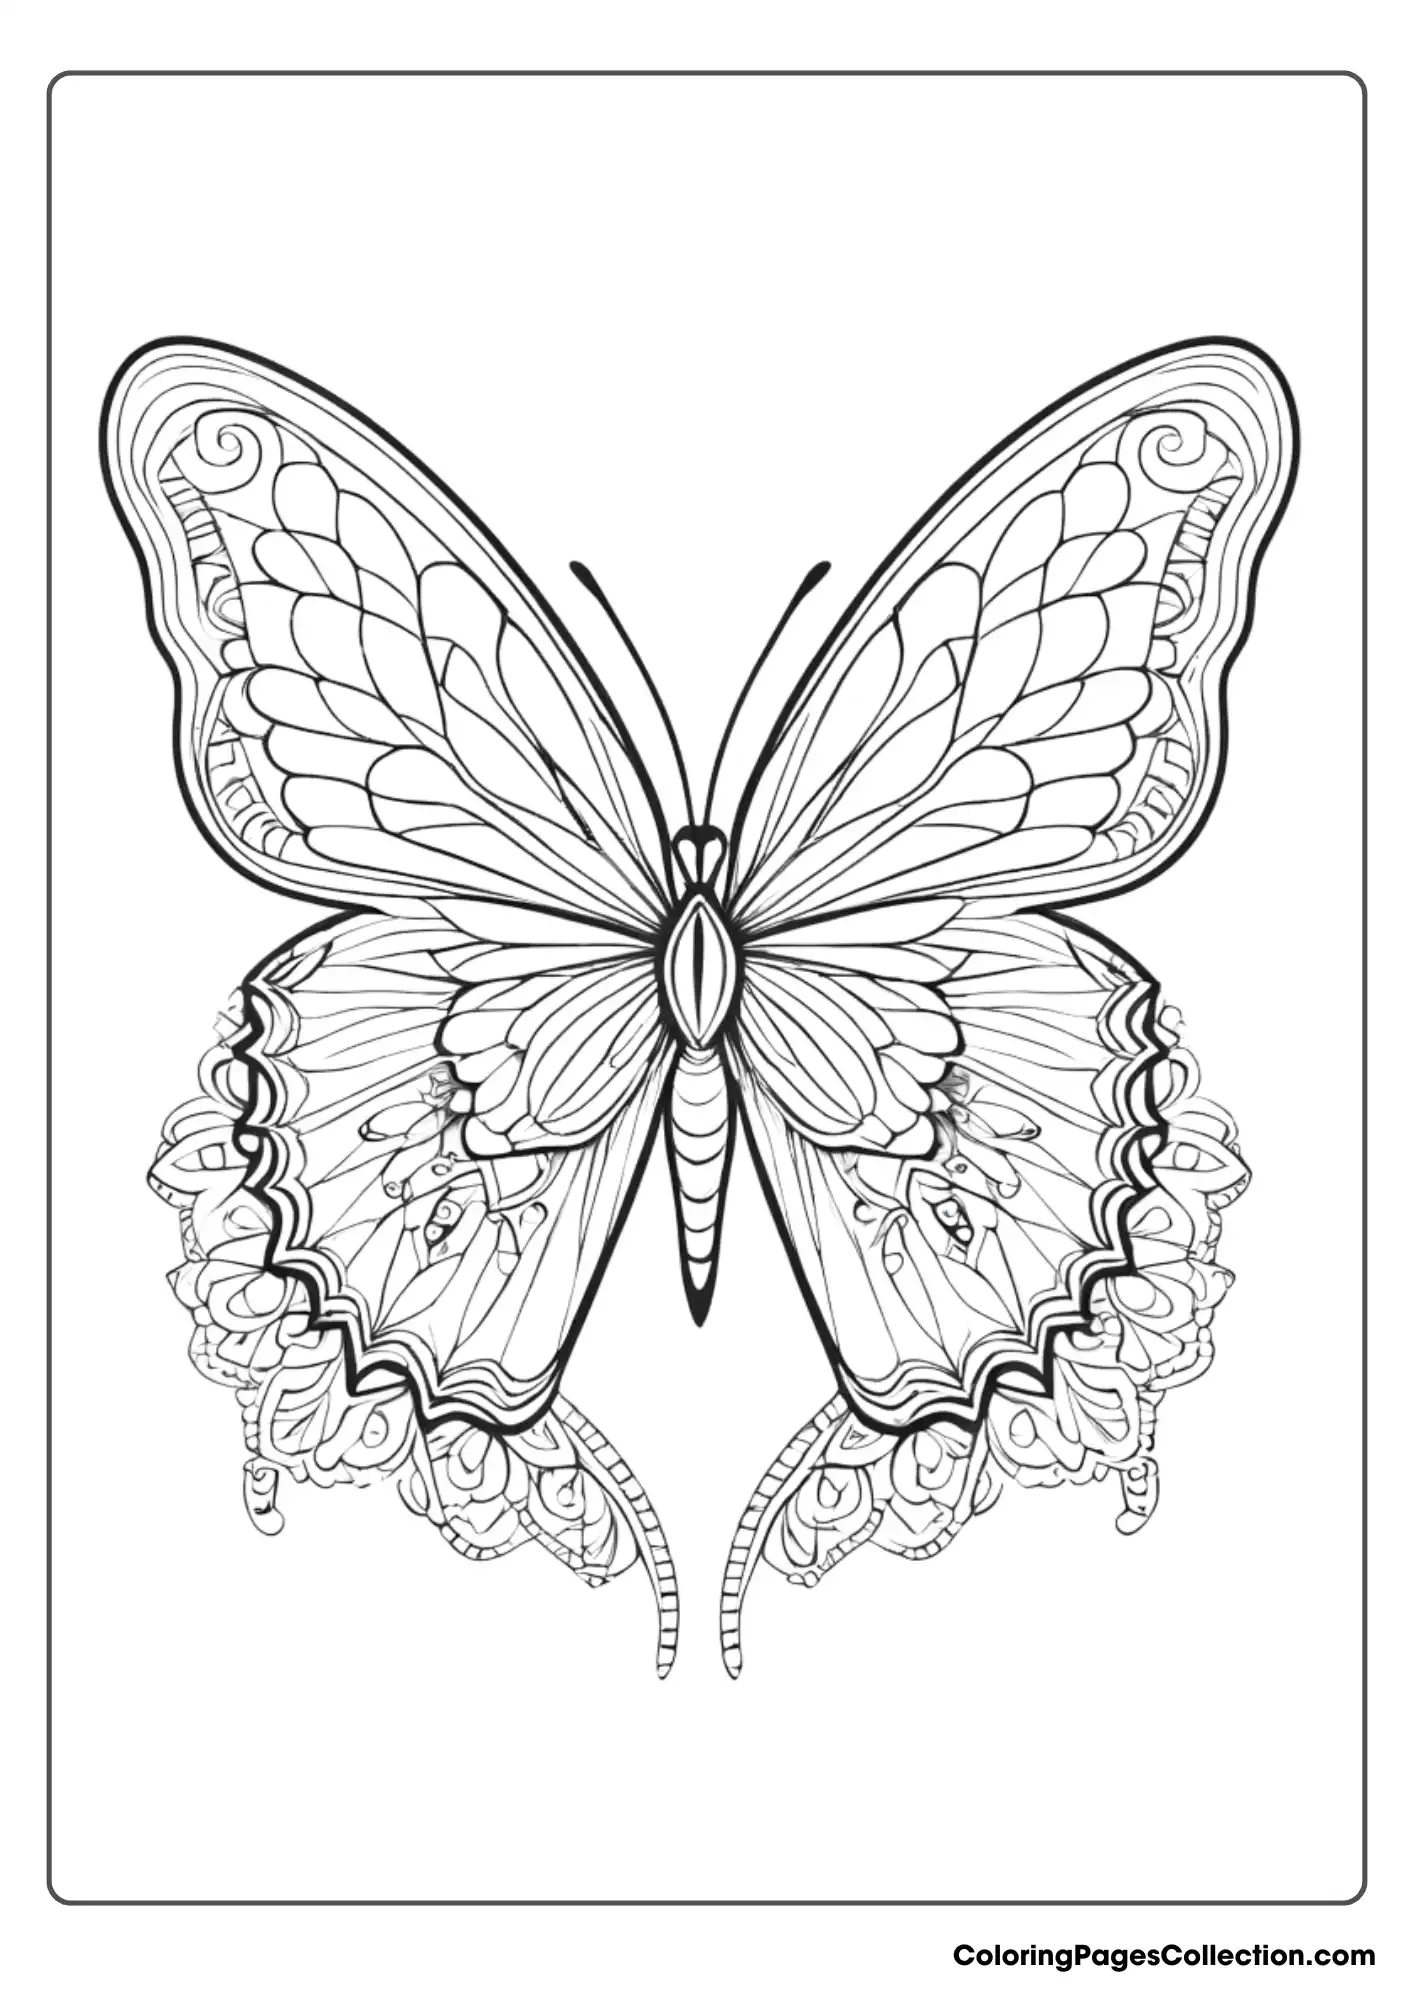 Coloring pages for teens, Detailed Butterfly